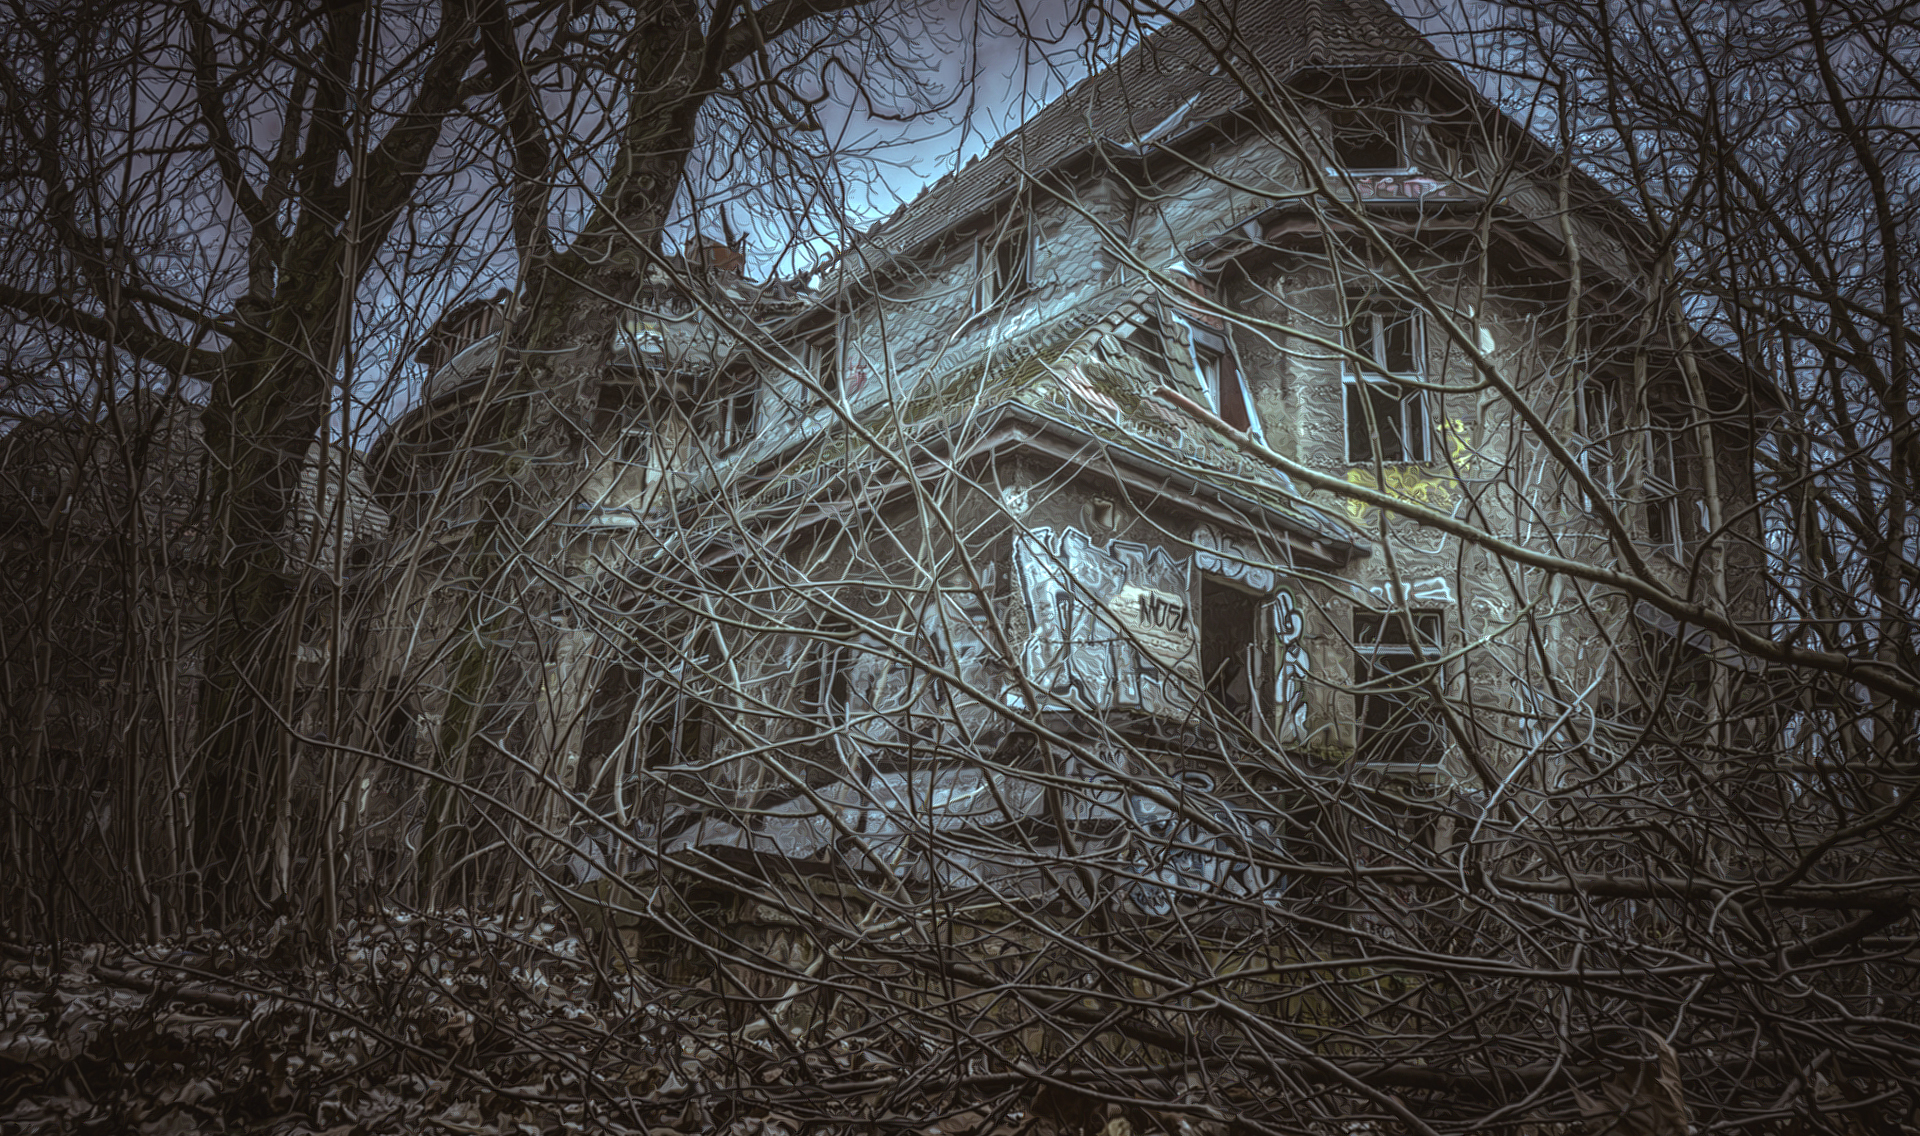 EXT. HORROR HOUSE BRANCHES – DAY